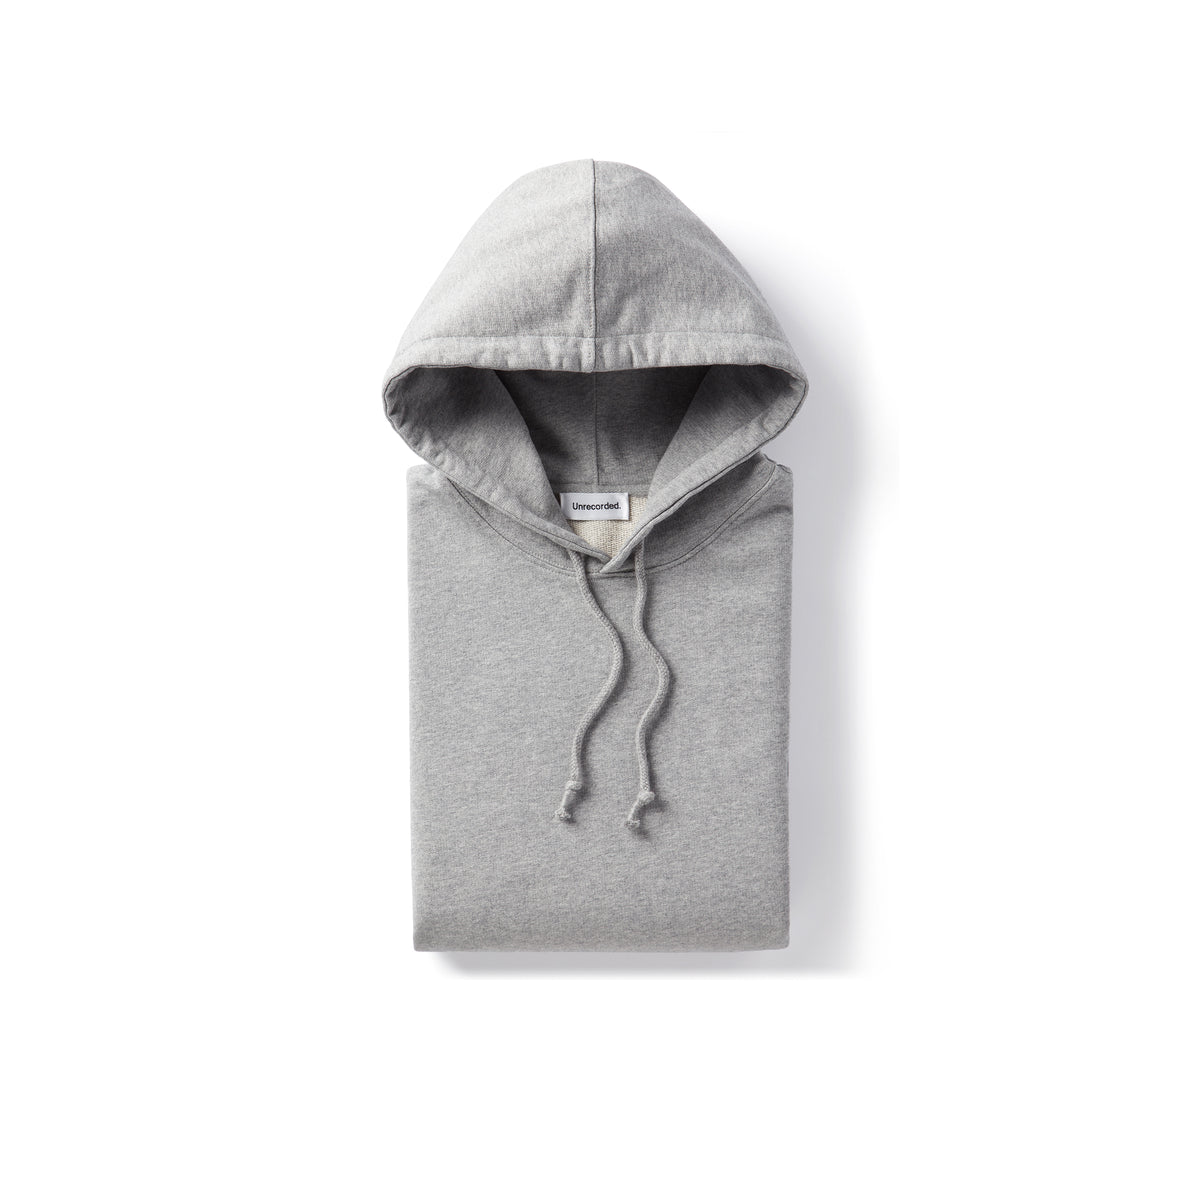 Hoodie in Grey made from organic cotton - Front Men - Only Men